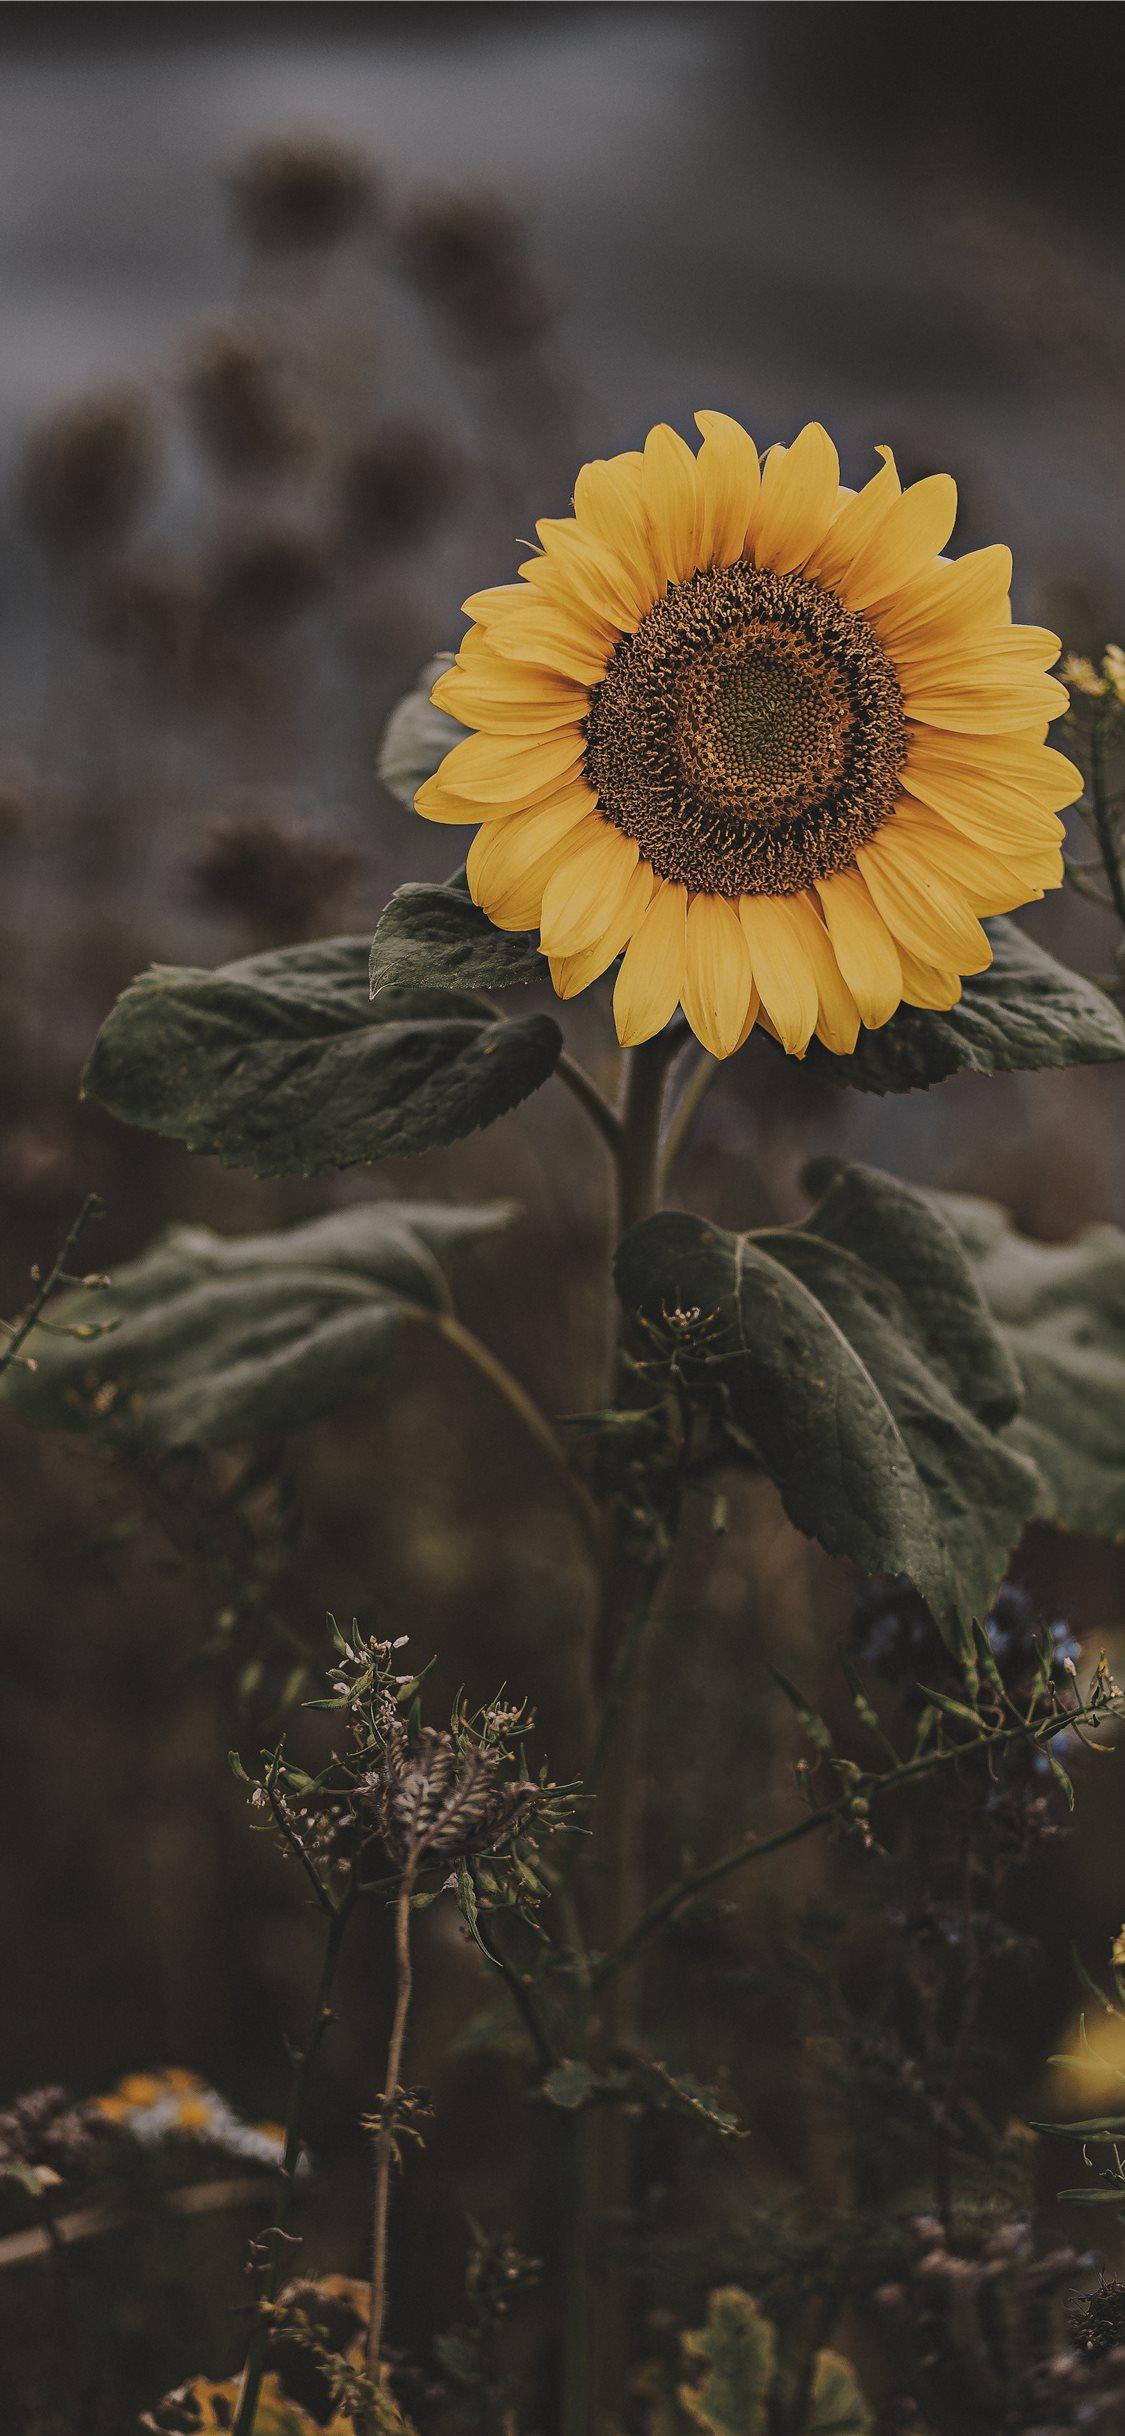 Sunflower iPhone Wallpapers - Wallpaper Cave